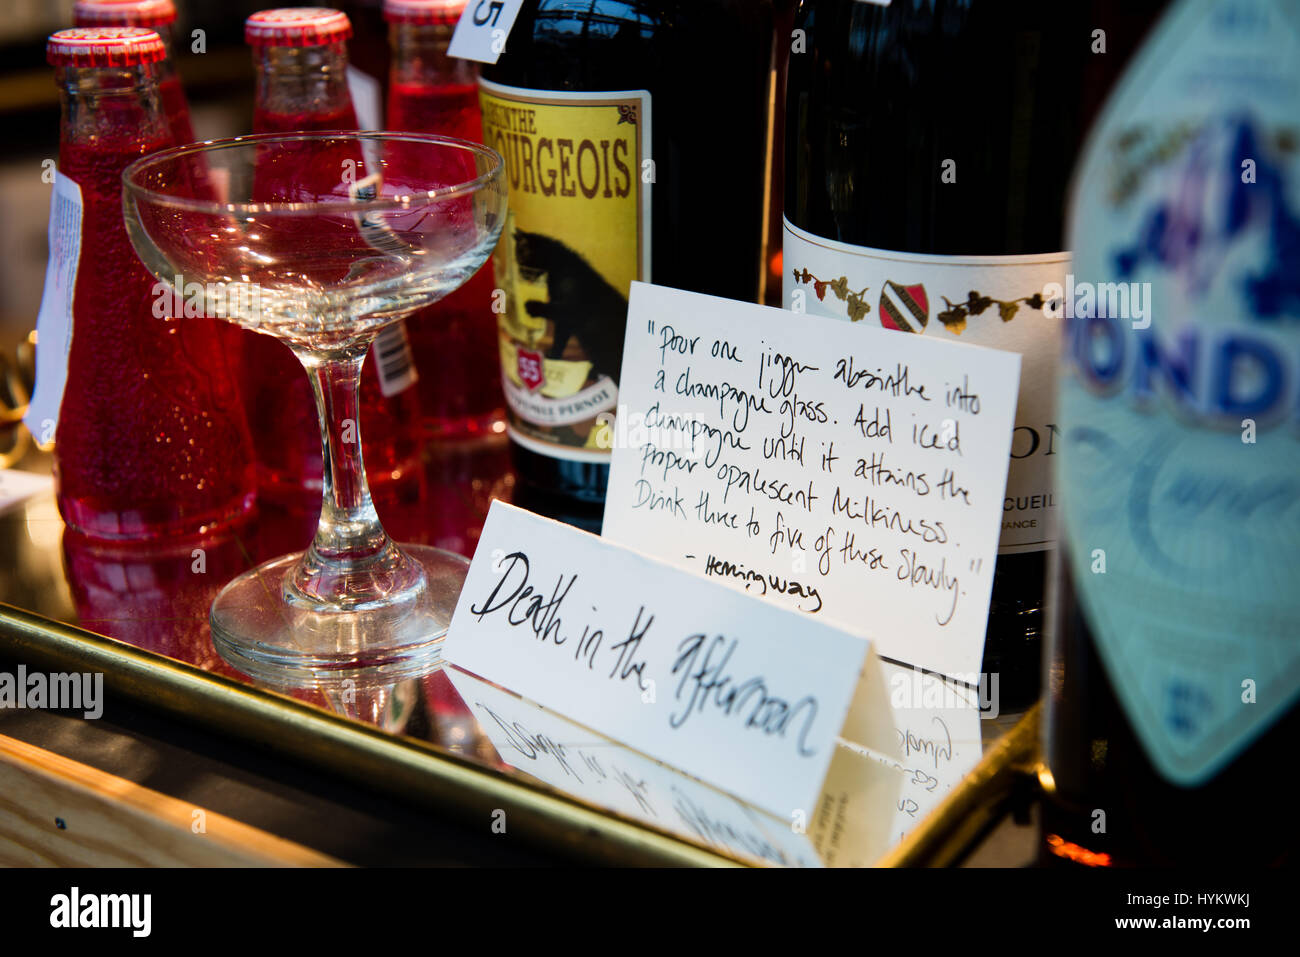 Death in the Afternoon cocktail recipe on a stall in the Glass Market in Copenhagen, Denmark Stock Photo